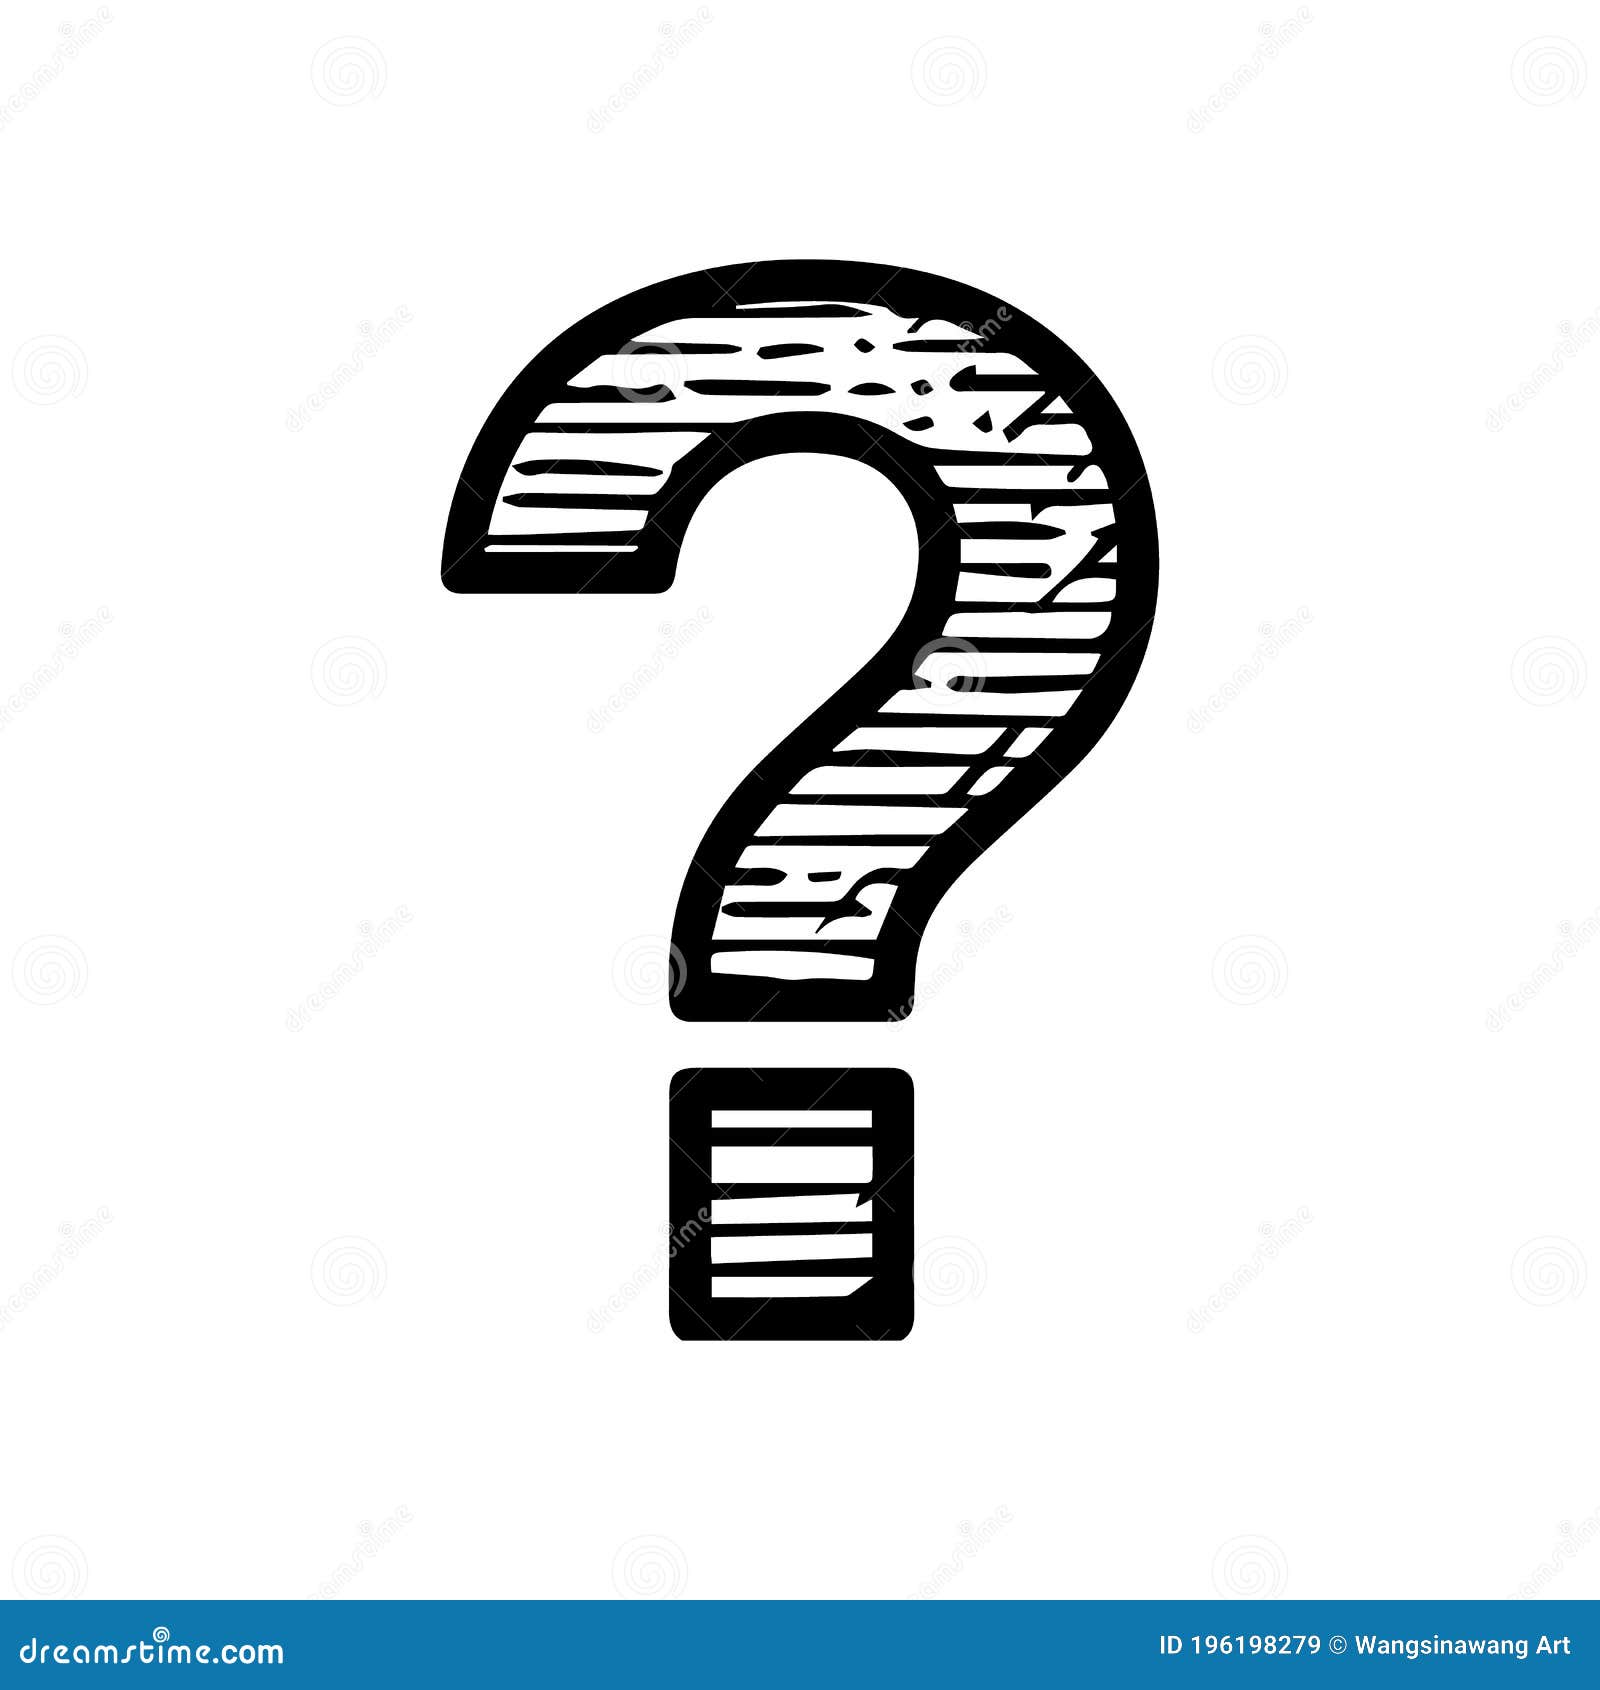 10366 Question Mark Line Drawing Images Stock Photos  Vectors   Shutterstock